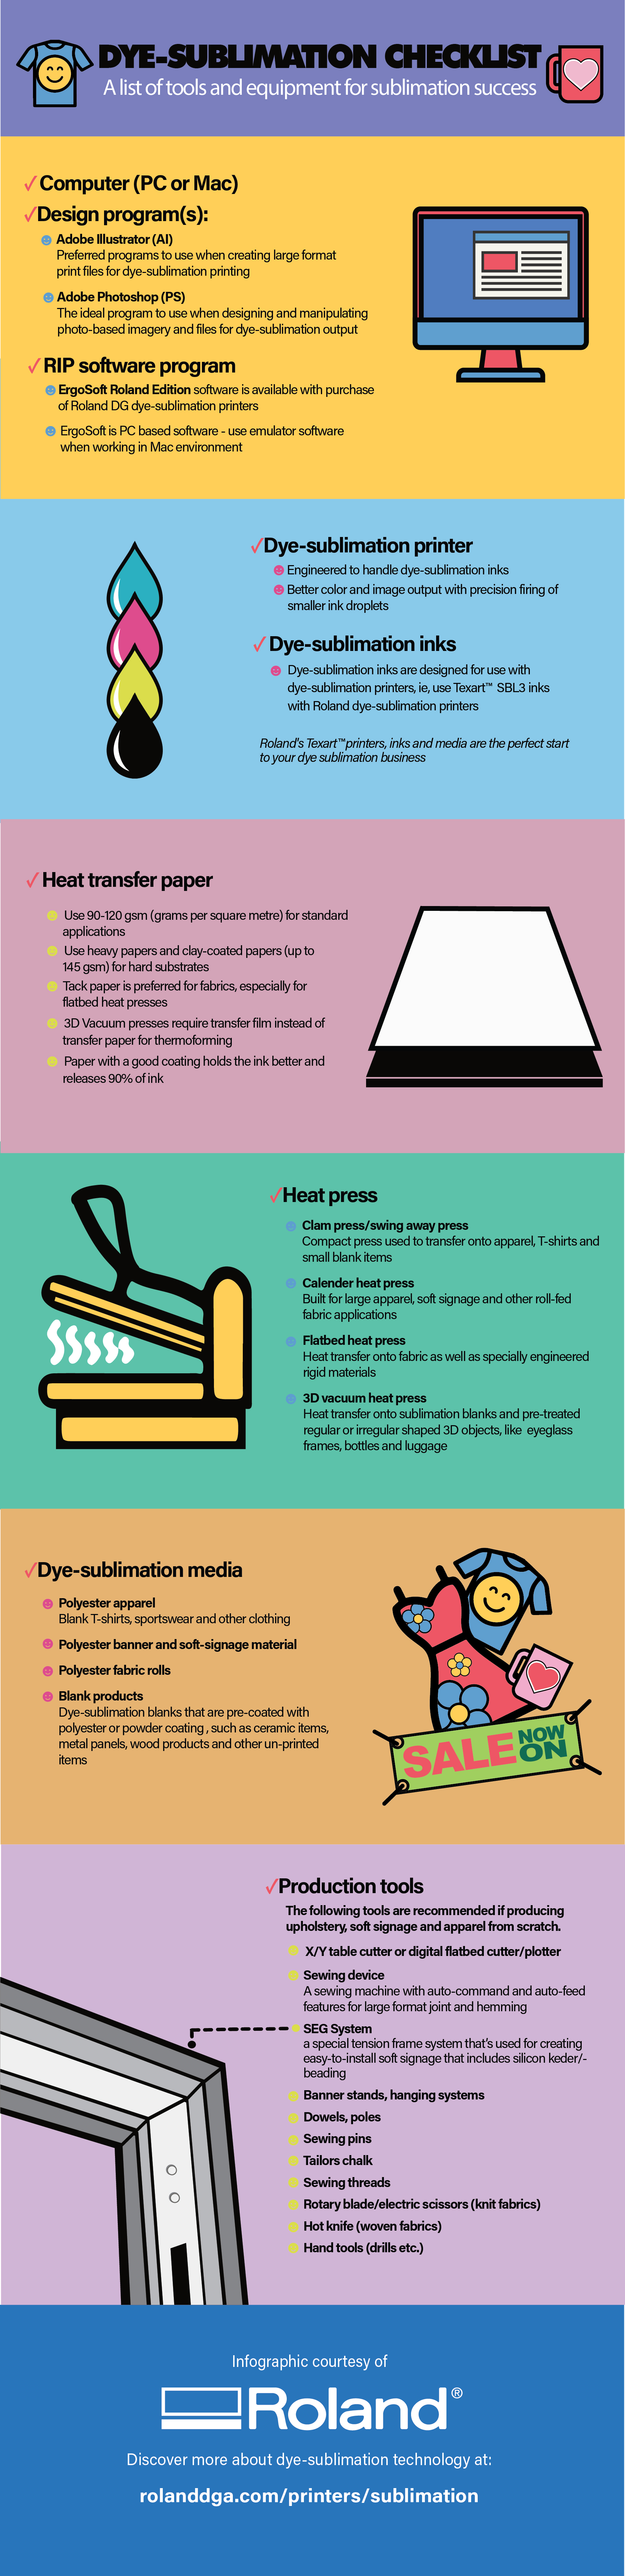 dye sublimation infographic